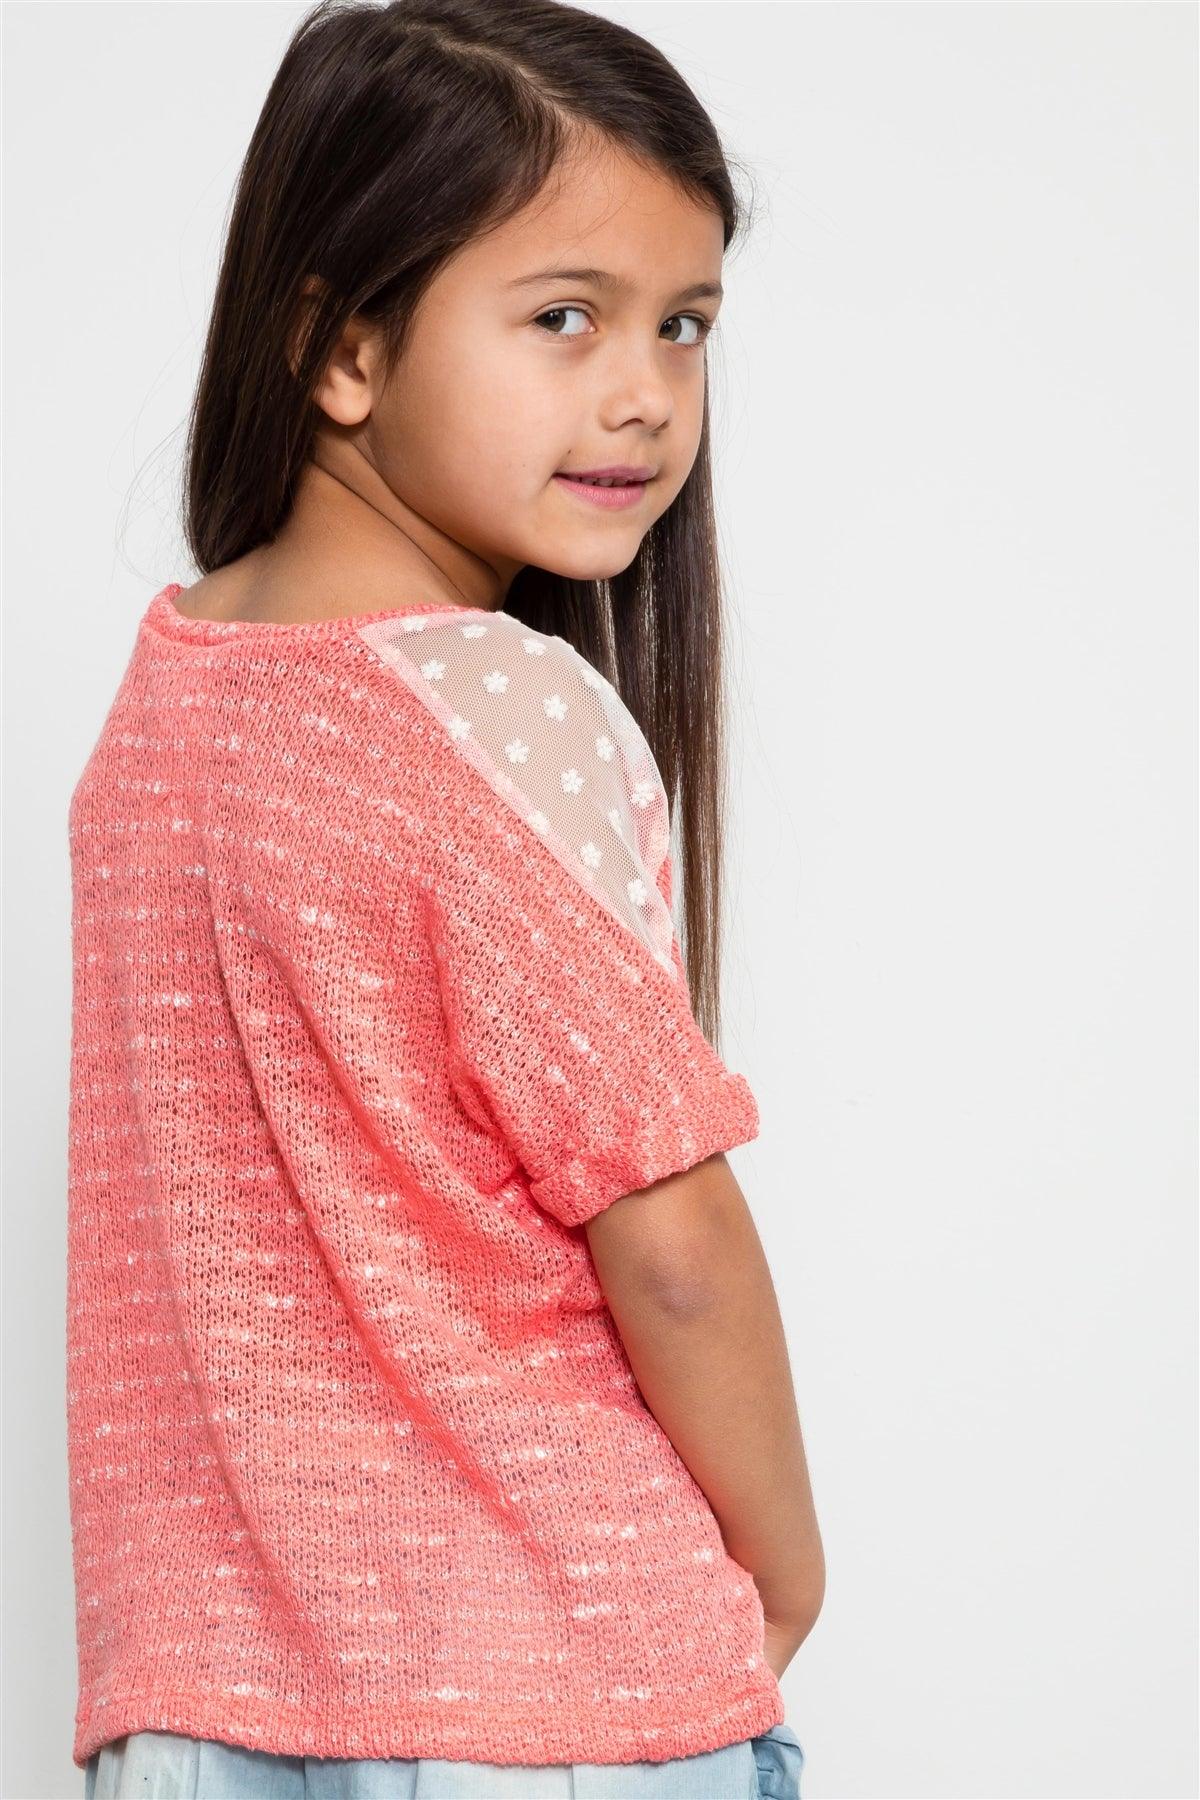 Girls Coral Knit Short Sleeve Top WIth Mesh Shoulder / 1-2-2-1